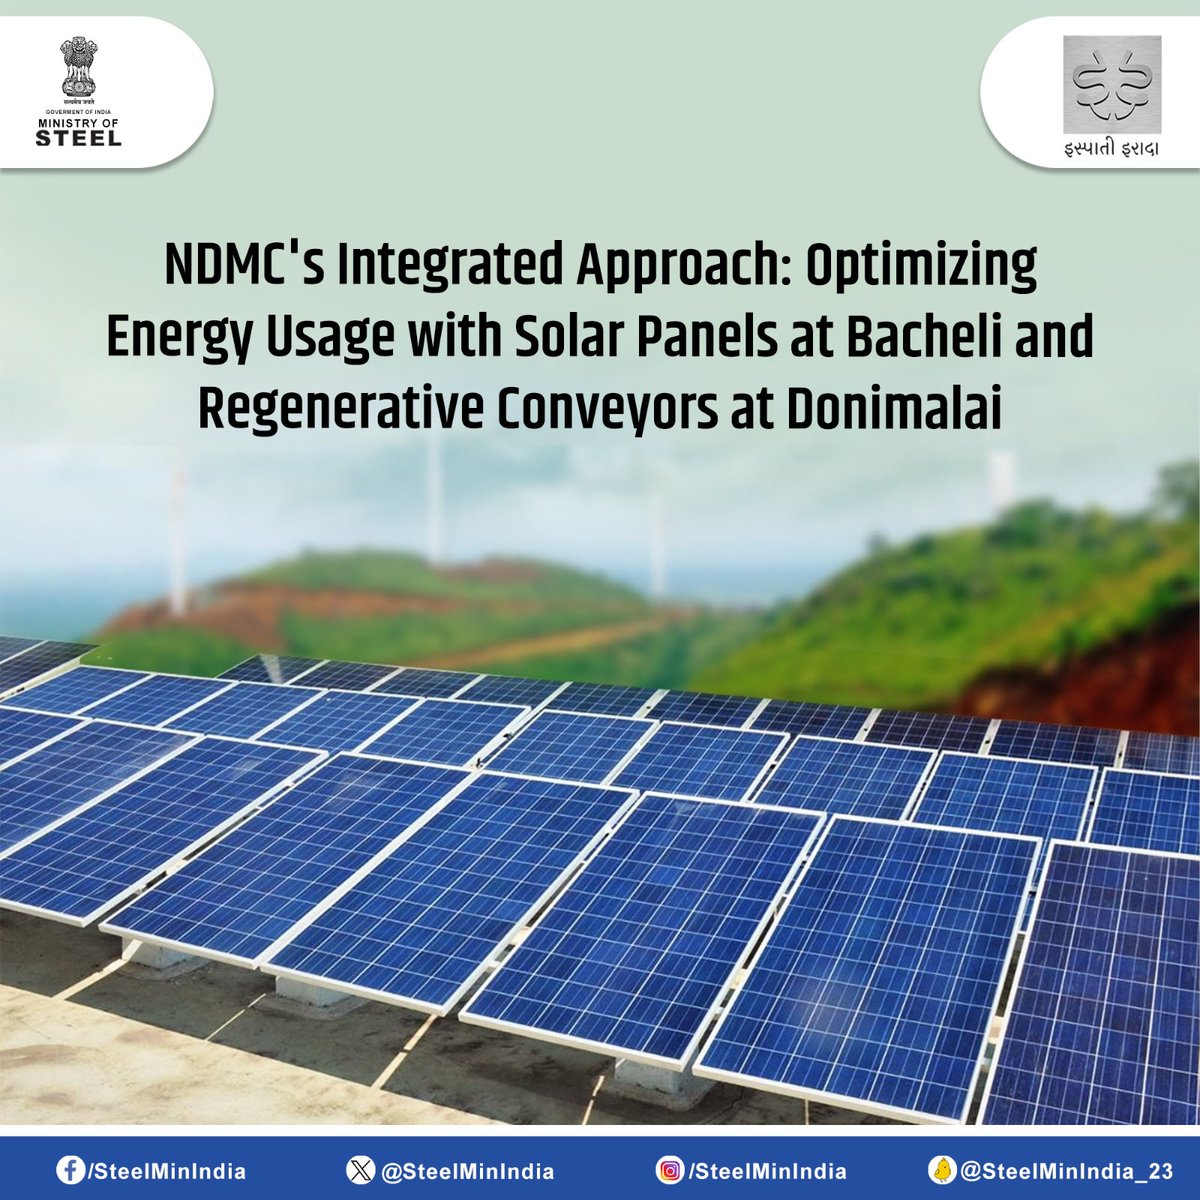 Leading the charge in sustainability! #NDMC adopts a multifaceted strategy, integrating solar panels at #Bacheli and regenerative conveyors at #Donimalai to optimize energy usage. #Sustainability #RenewableEnergy